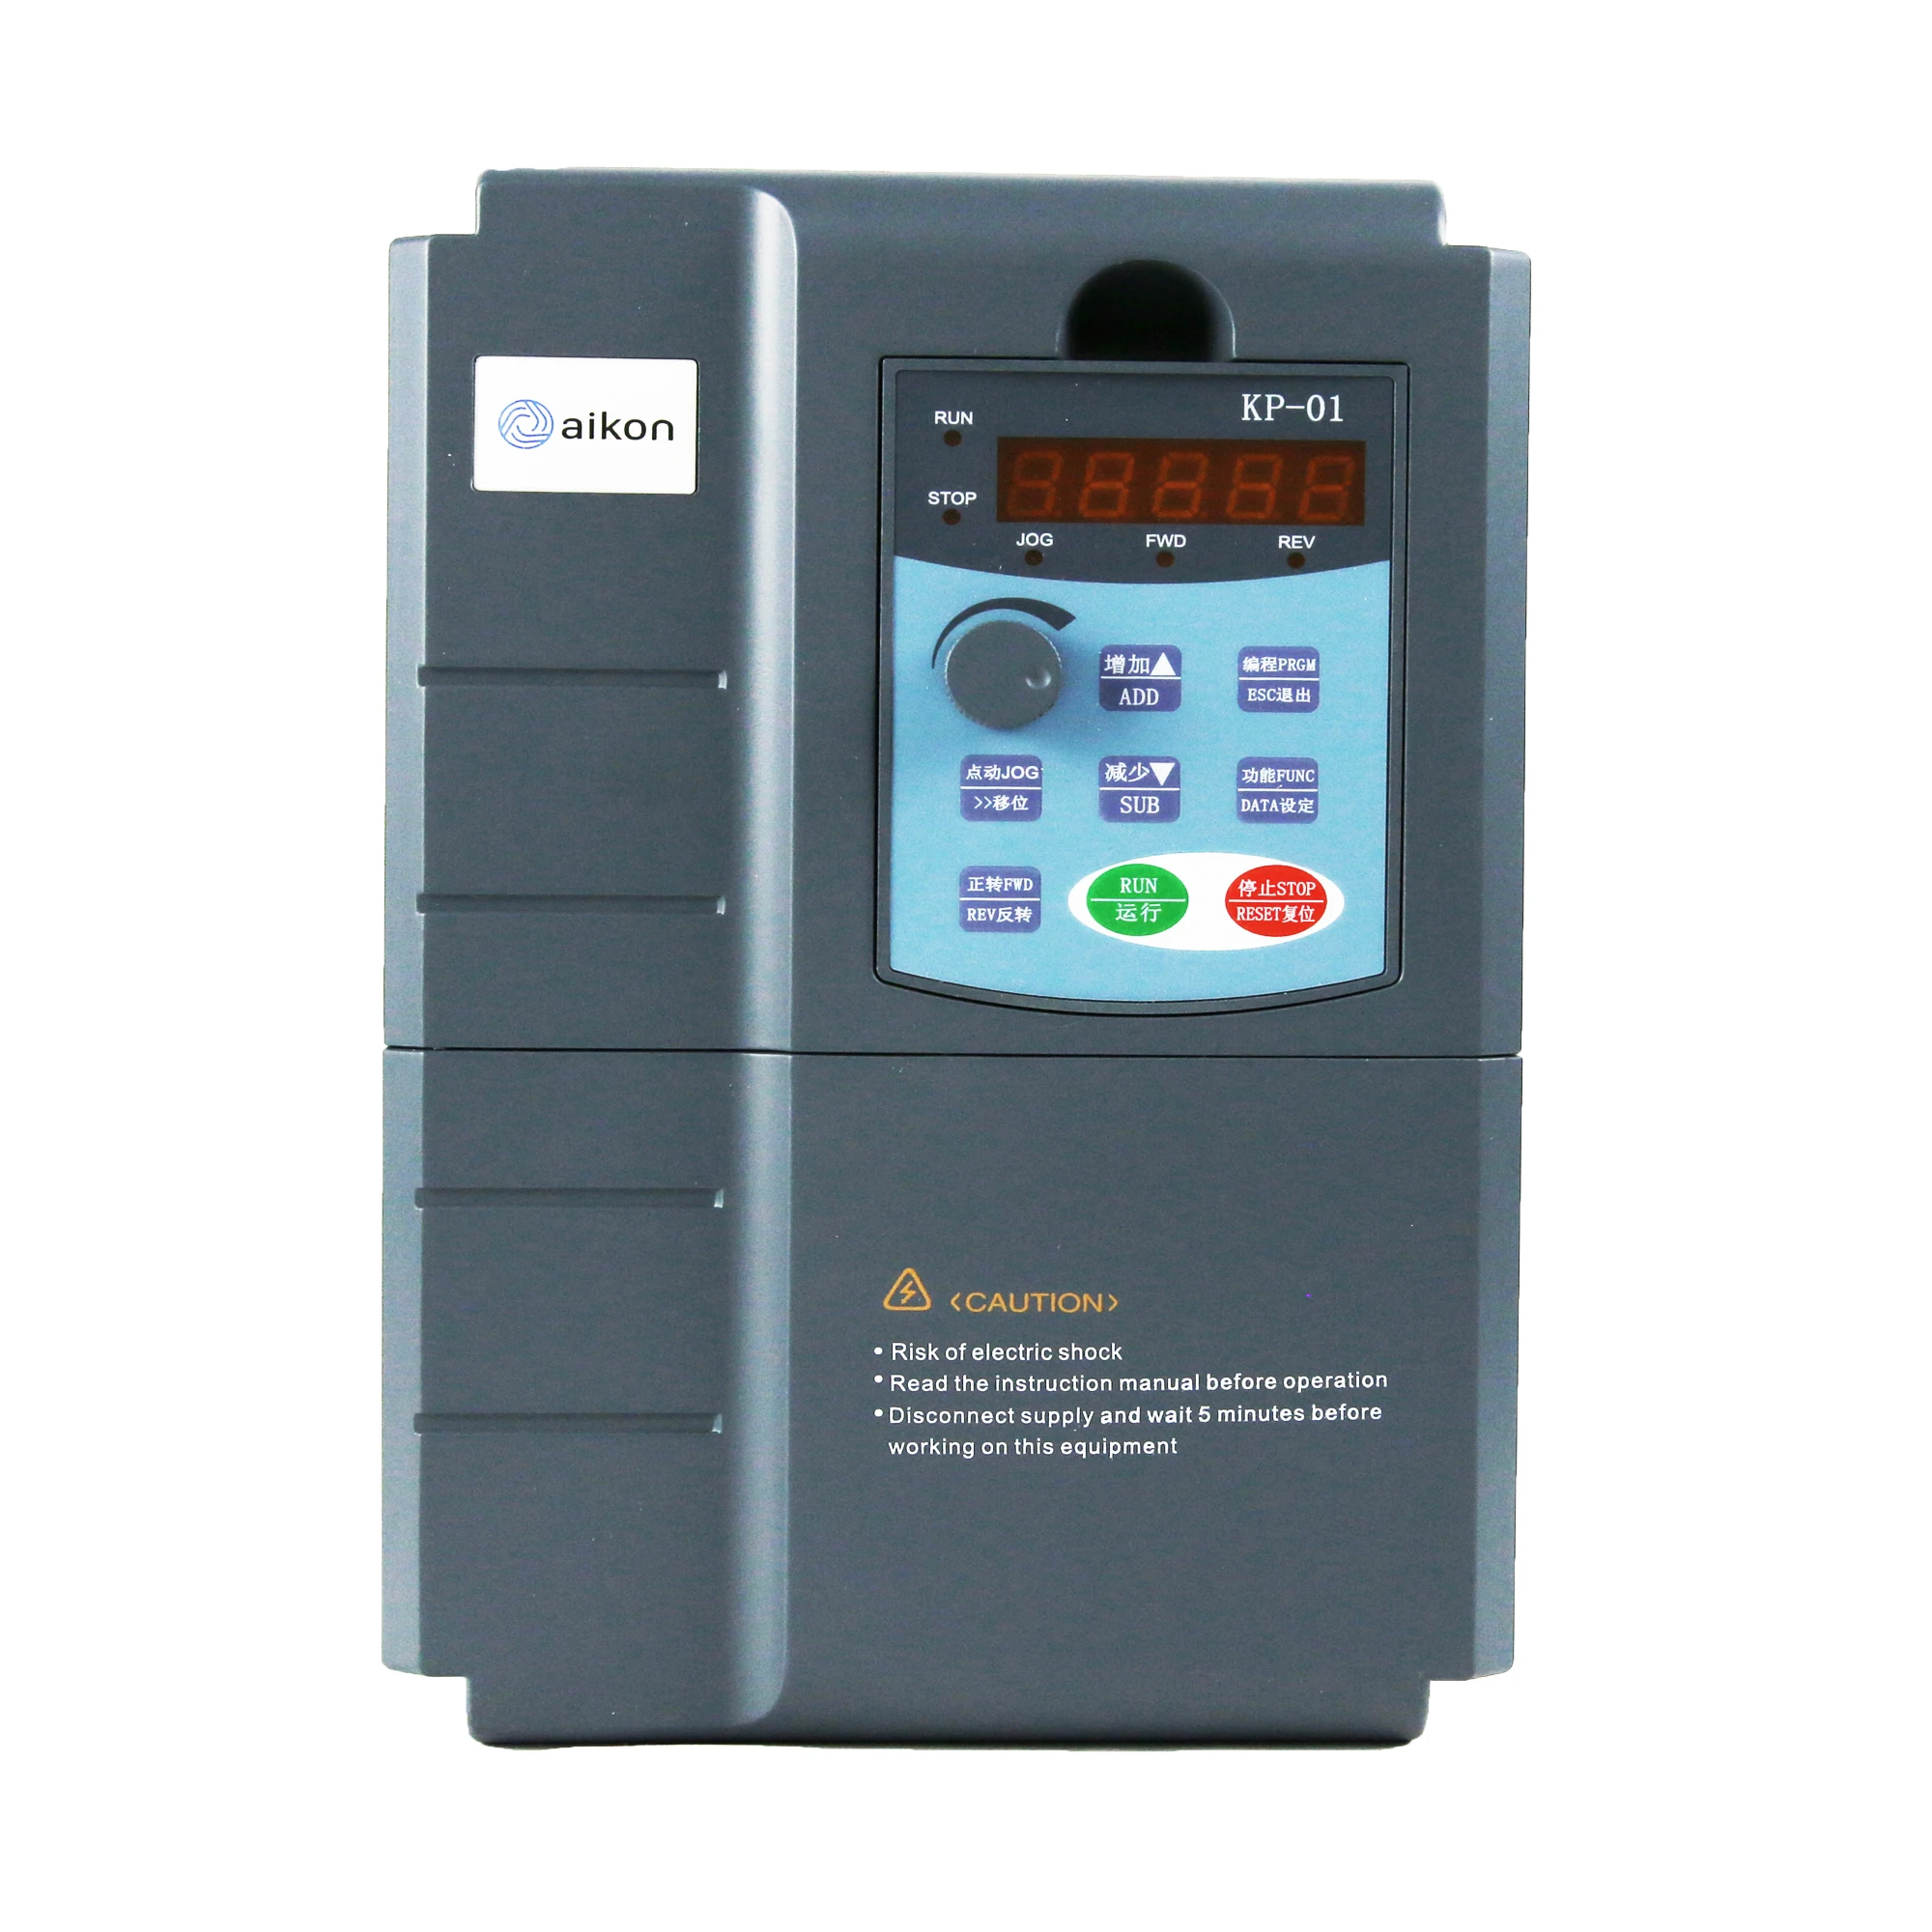 

2.2KW 220V input 380V output aikon Industrial water pressure booster pump VFD variable speed inverter with rising voltage